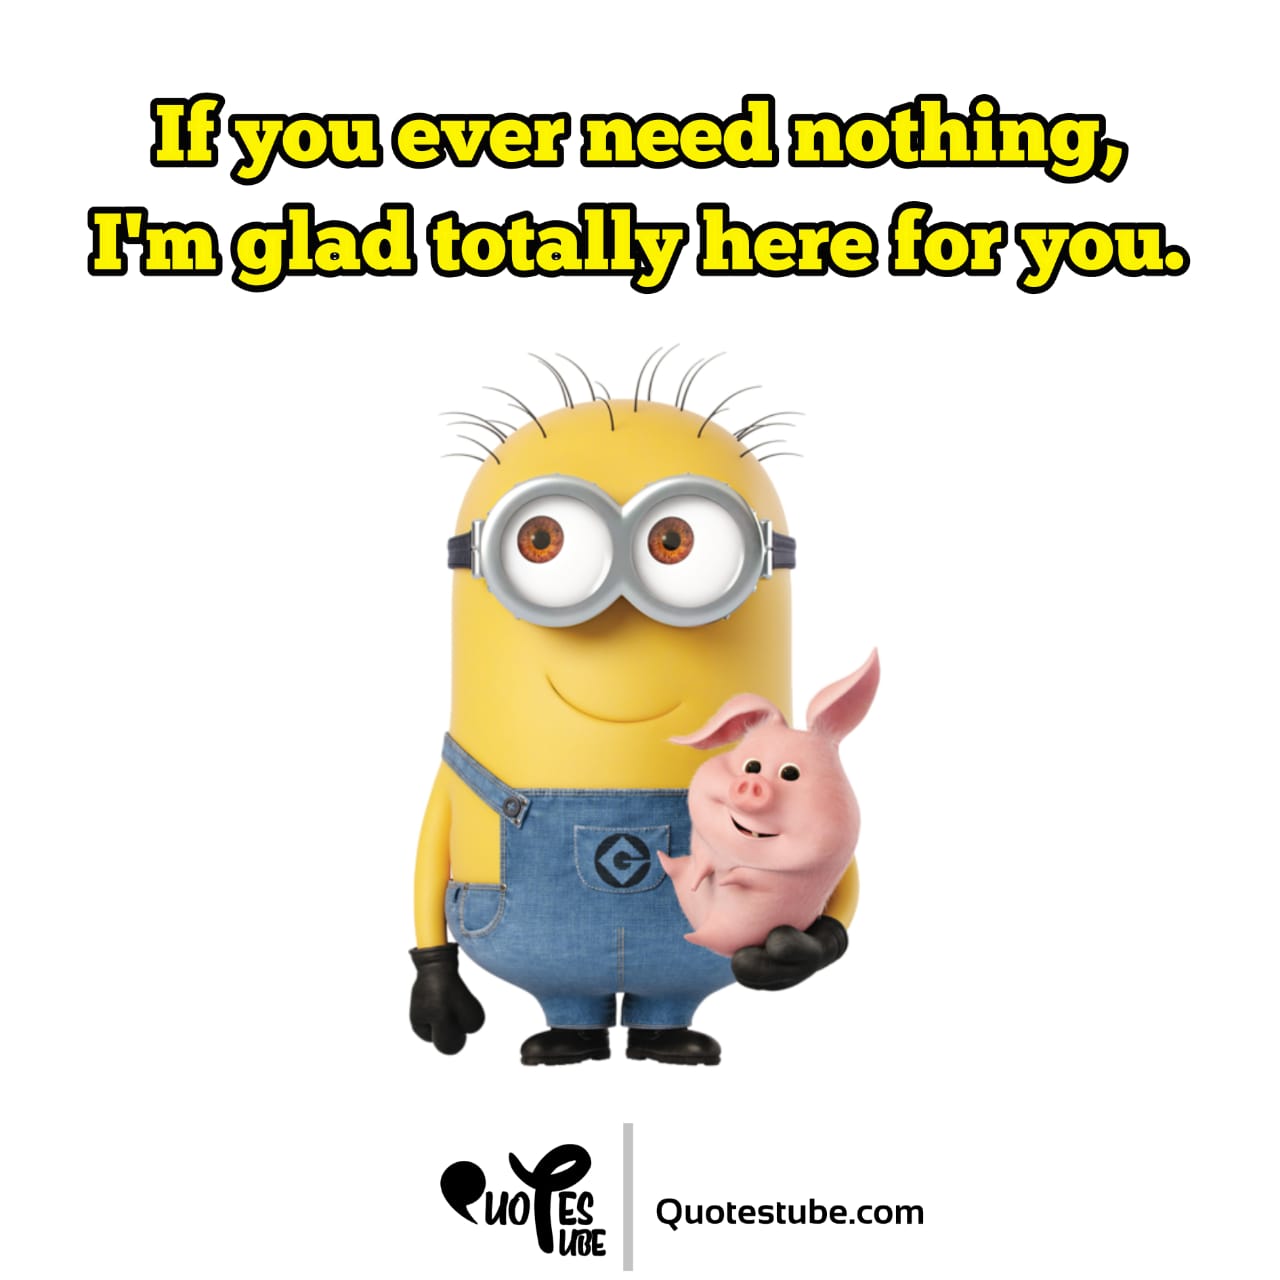 The Ultimate Collection Of 999 Minions Images With Quotes Incredible Range Of Minions Images